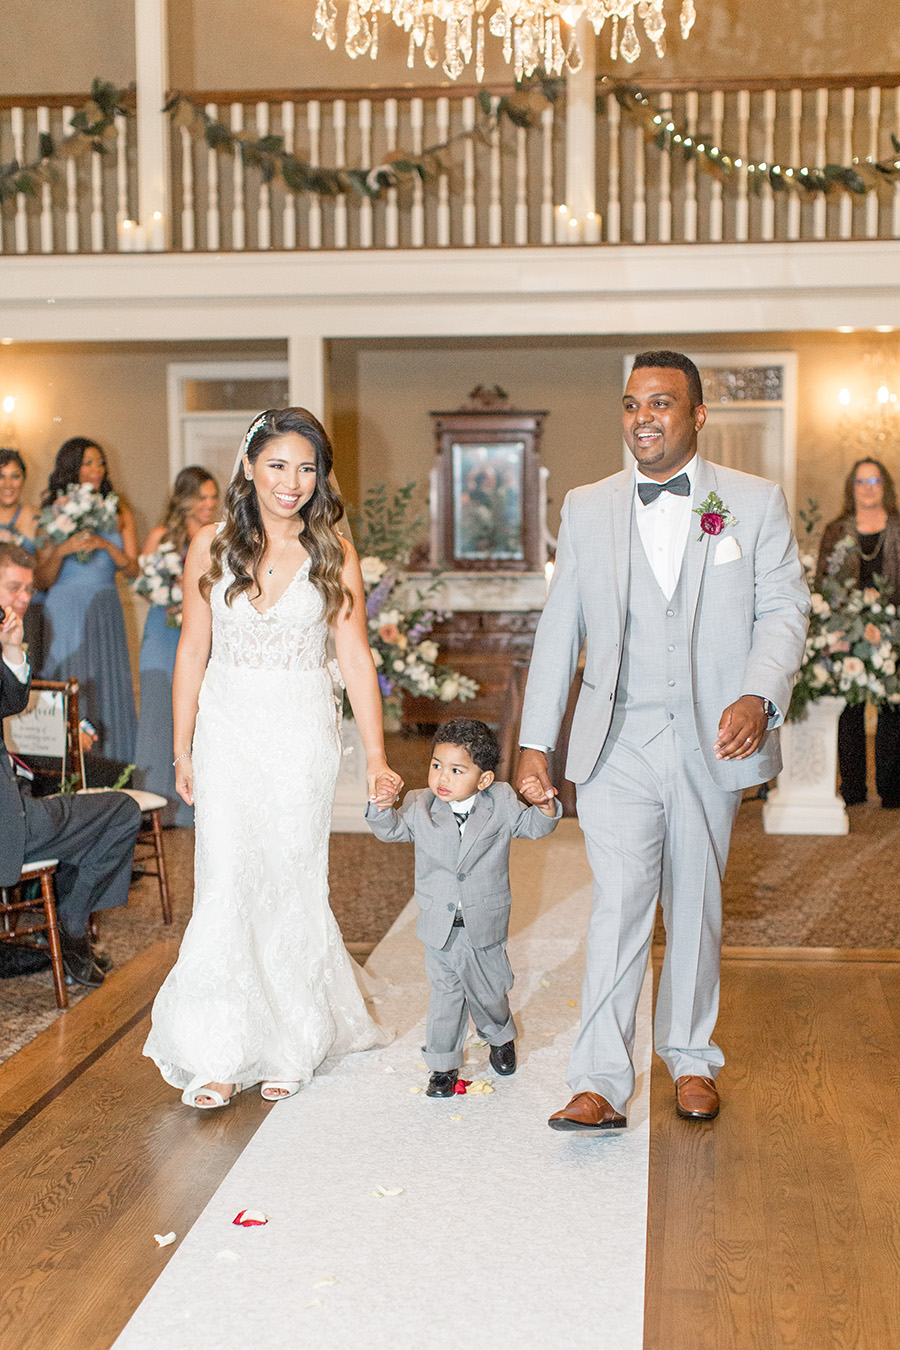 Bride and groom walking down the aisle with their son